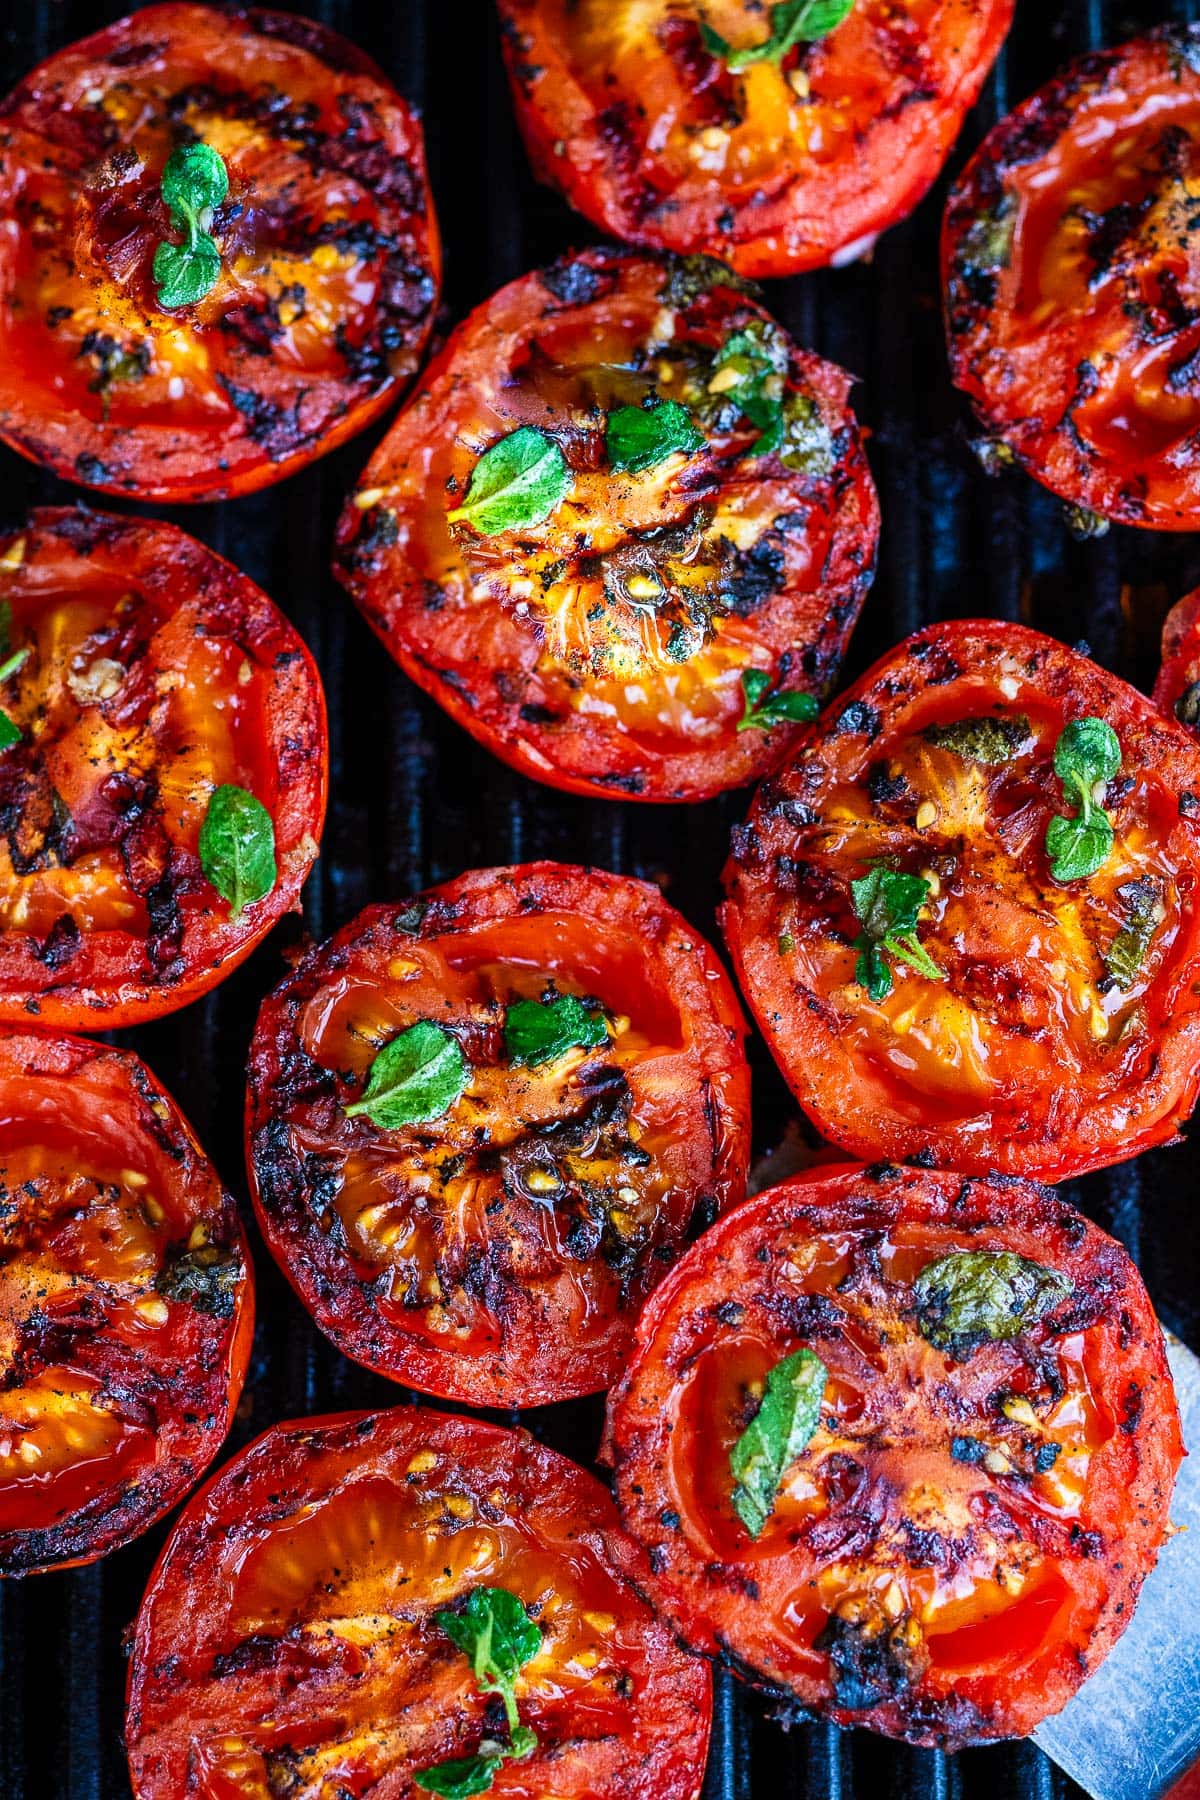 The tomatoes on the grill with oregano. 